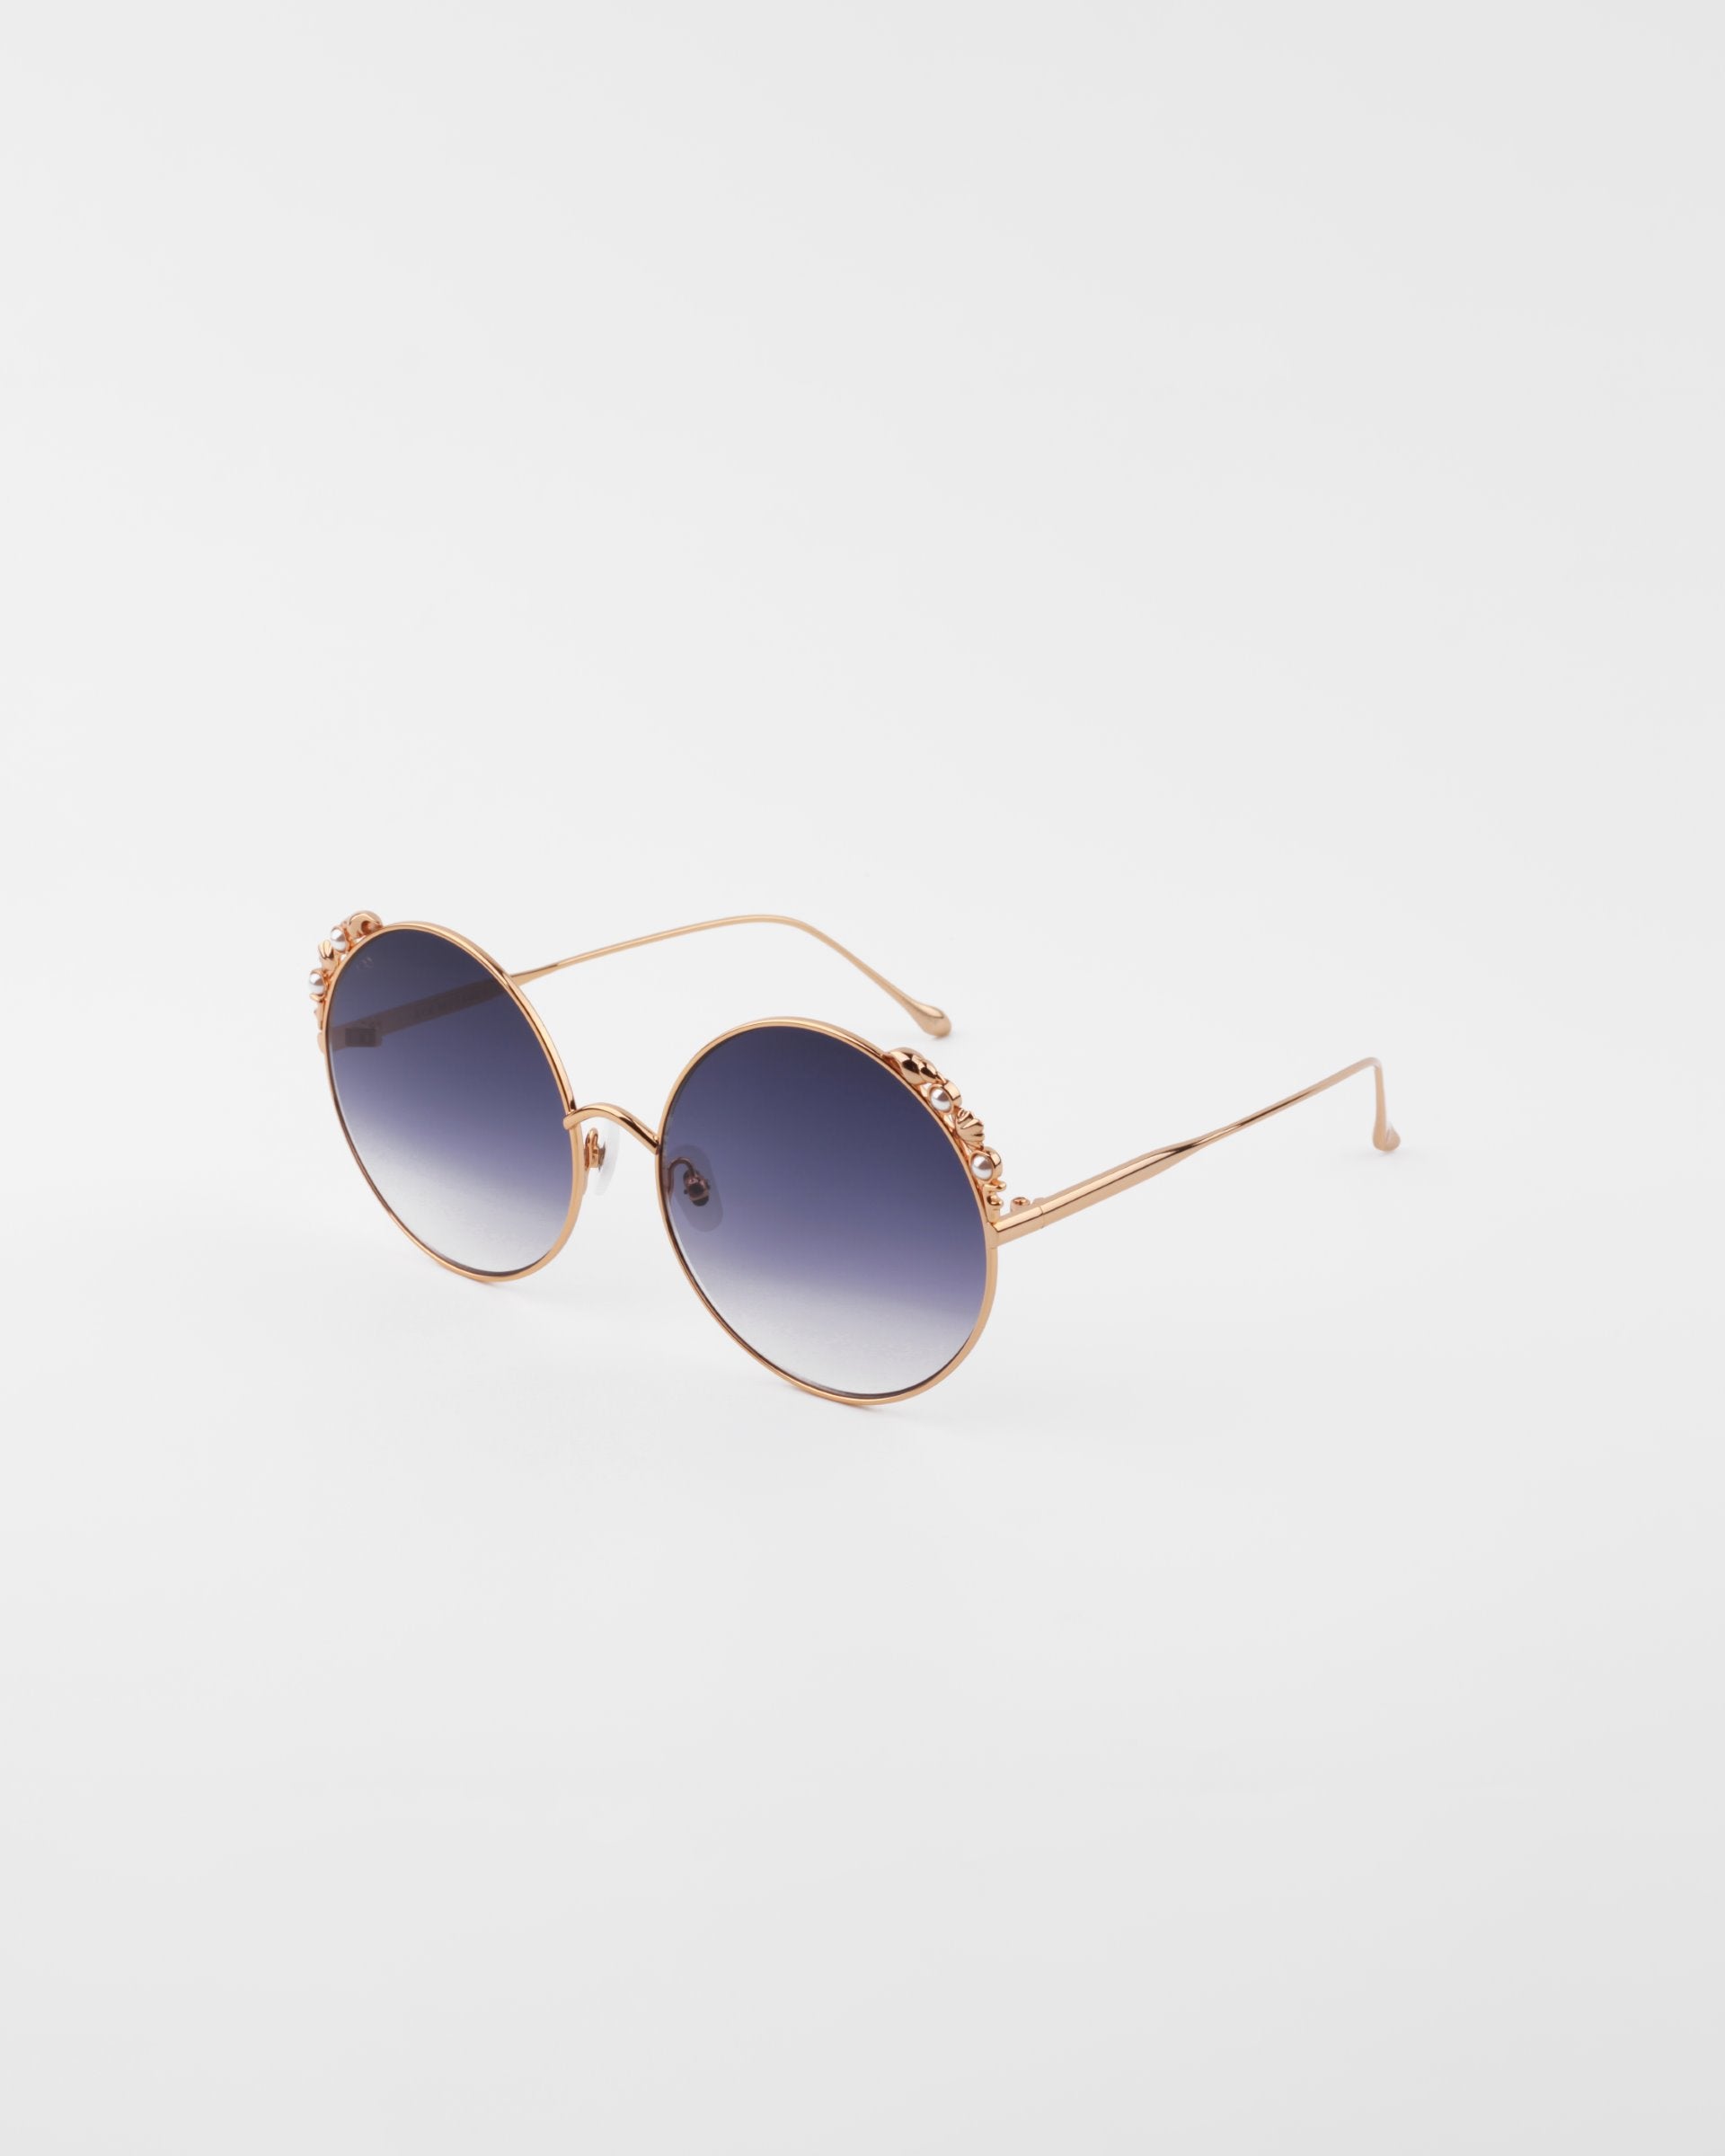 Round sunglasses with gold-colored frames and blue gradient lenses. Handmade gold-plated detailing adorns the top of the lenses. The ultra-lightweight shatter resistant lenses are 100% UVA & UVB-protected, ensuring both style and safety. The Lindy by For Art's Sake® is positioned against a plain white background.